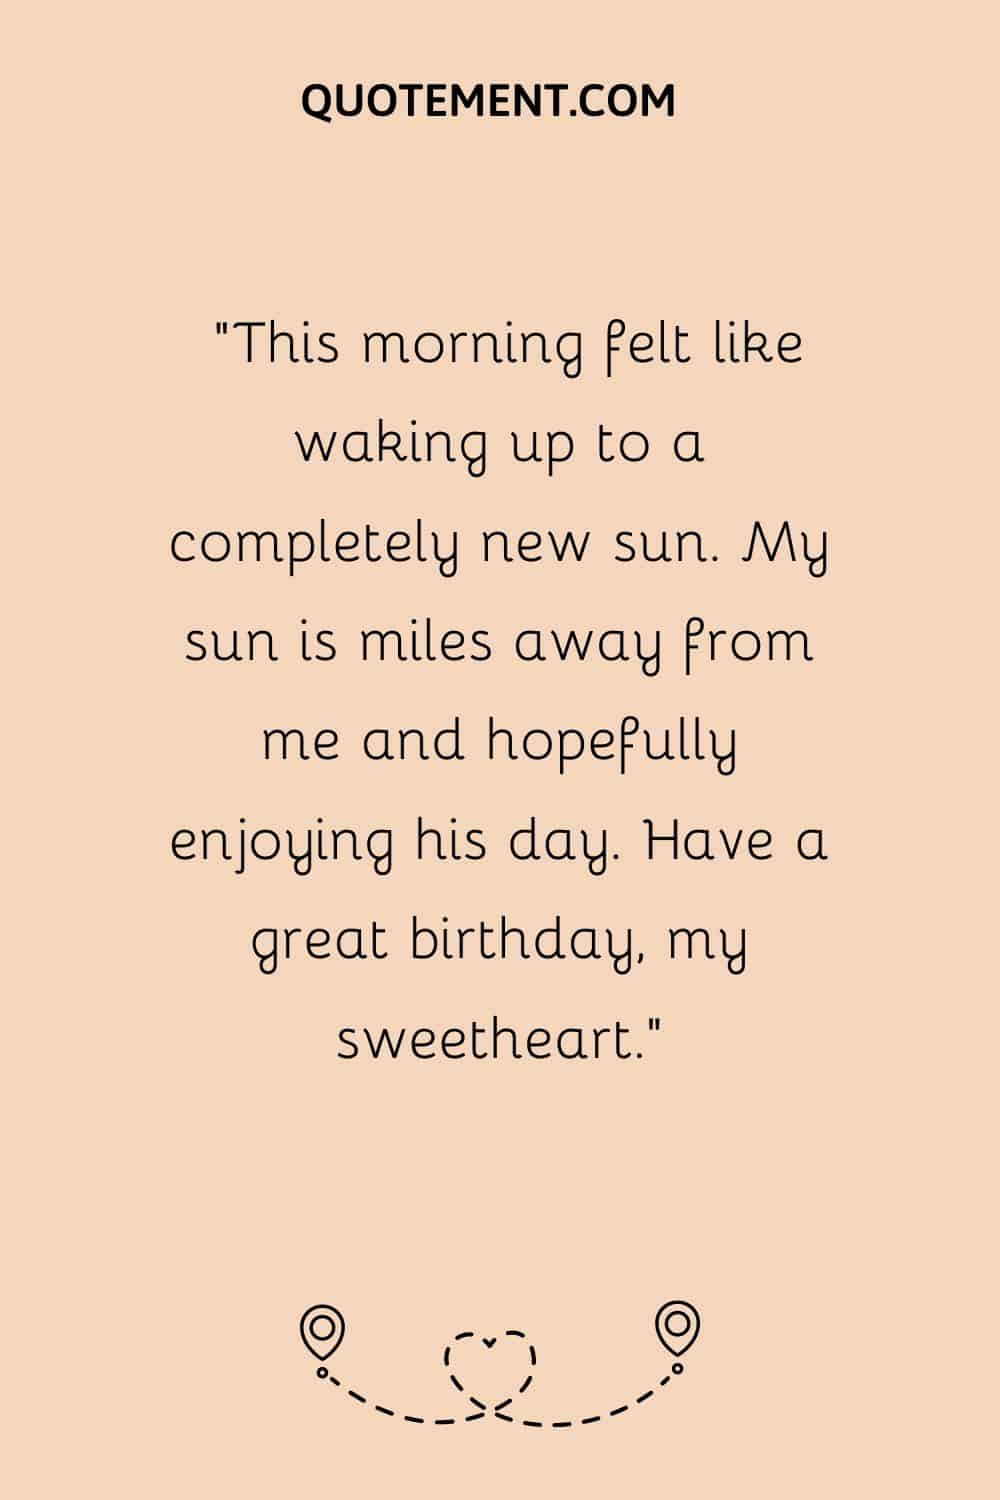 “This morning felt like waking up to a completely new sun. My sun is miles away from me and hopefully enjoying his day. Have a great birthday, my sweetheart.”